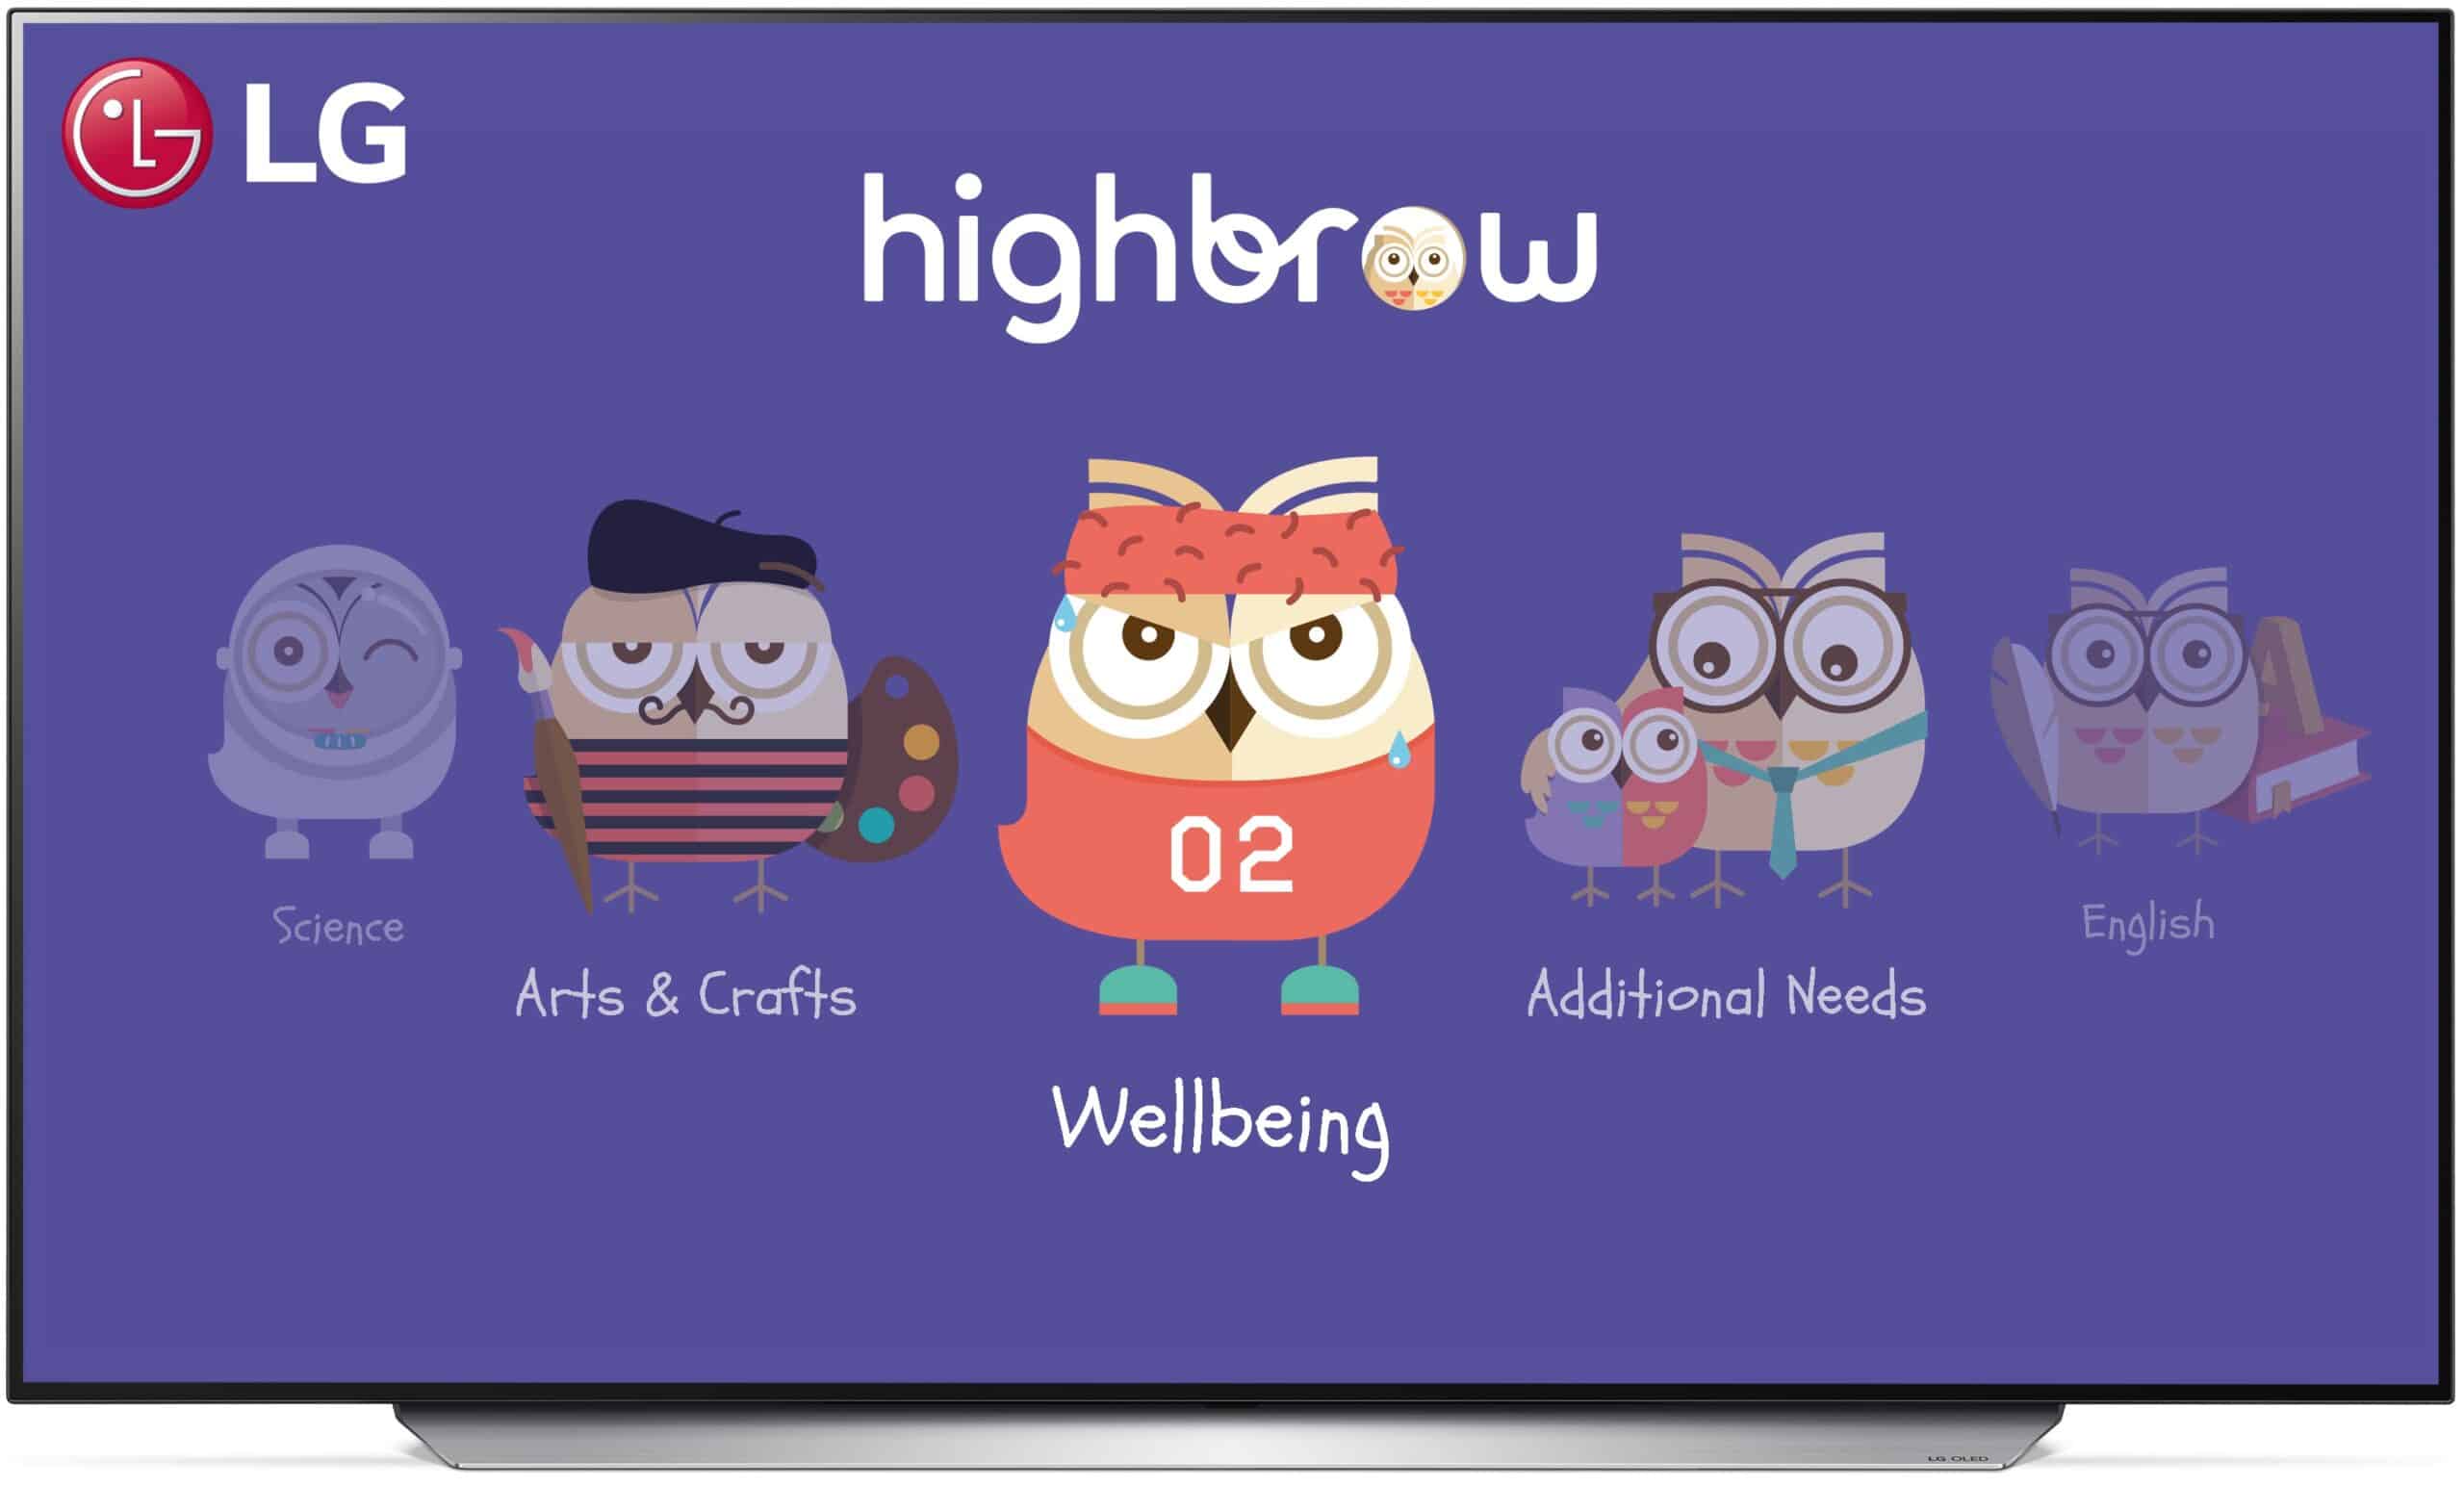 LG and Highbrow deliver expertly-curated educational TV content to young learners